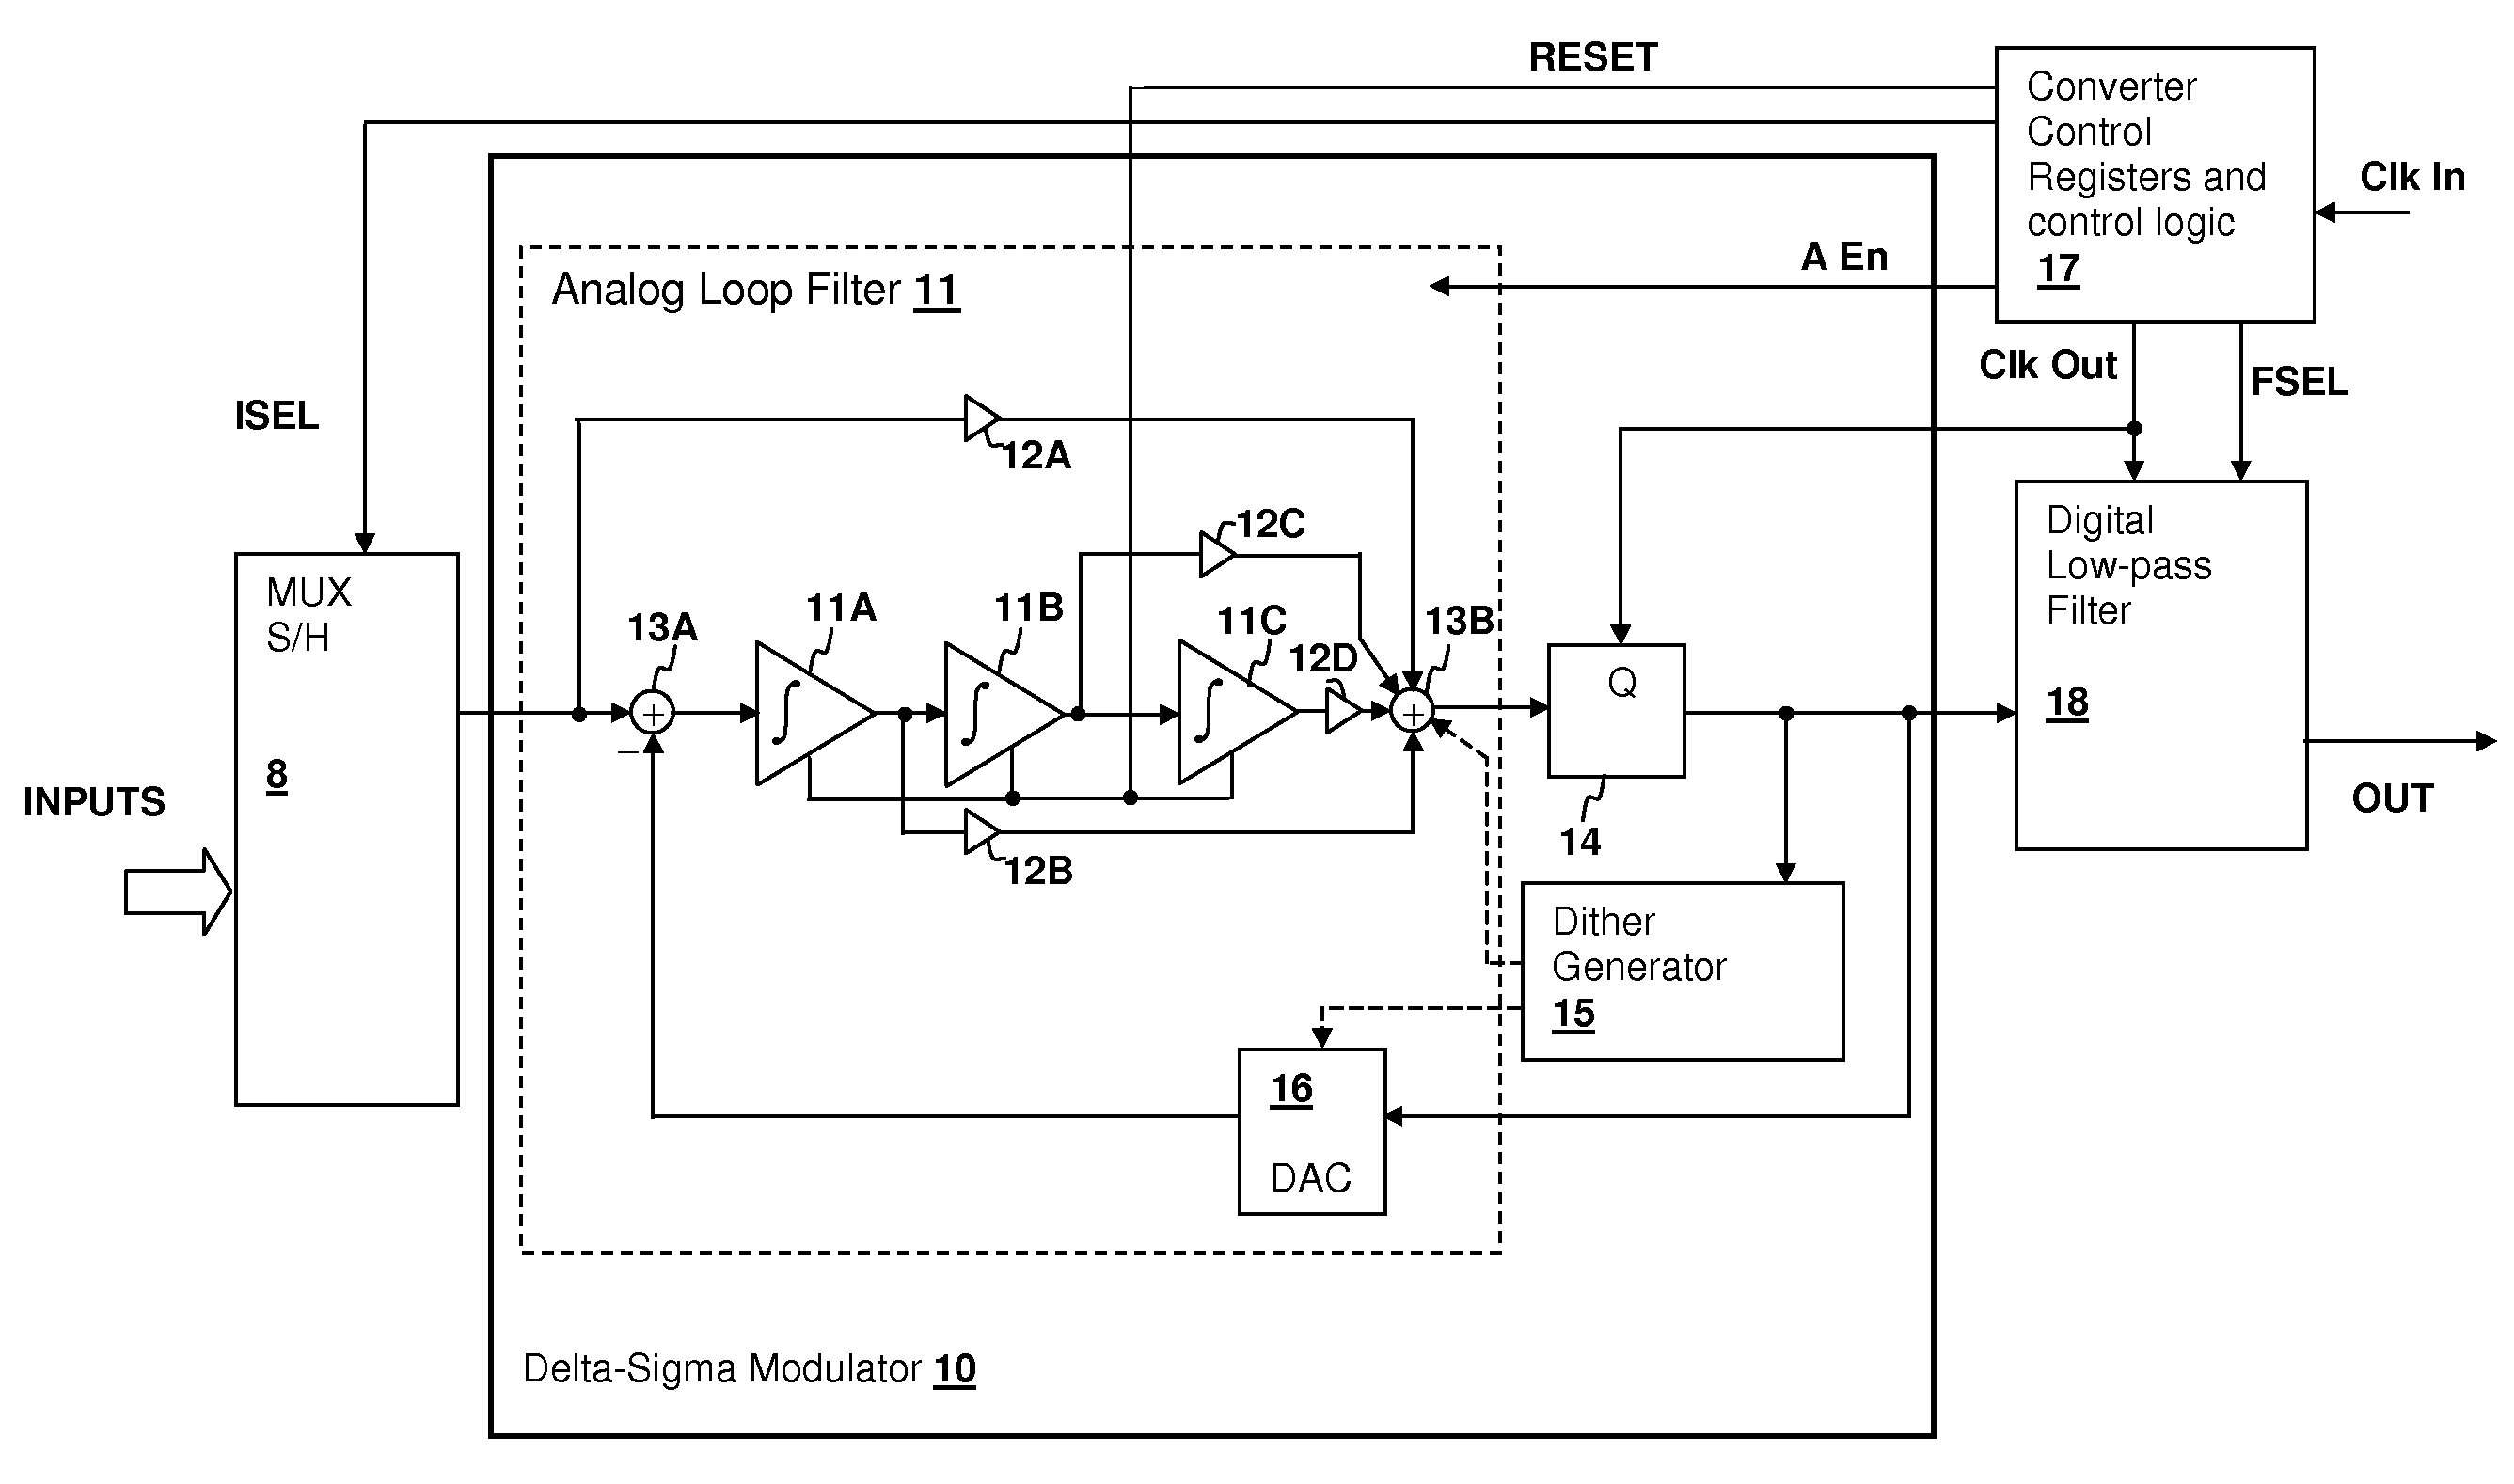 Delta-sigma analog-to-digital converter (ADC) having an intermittent power-down state between conversion cycles